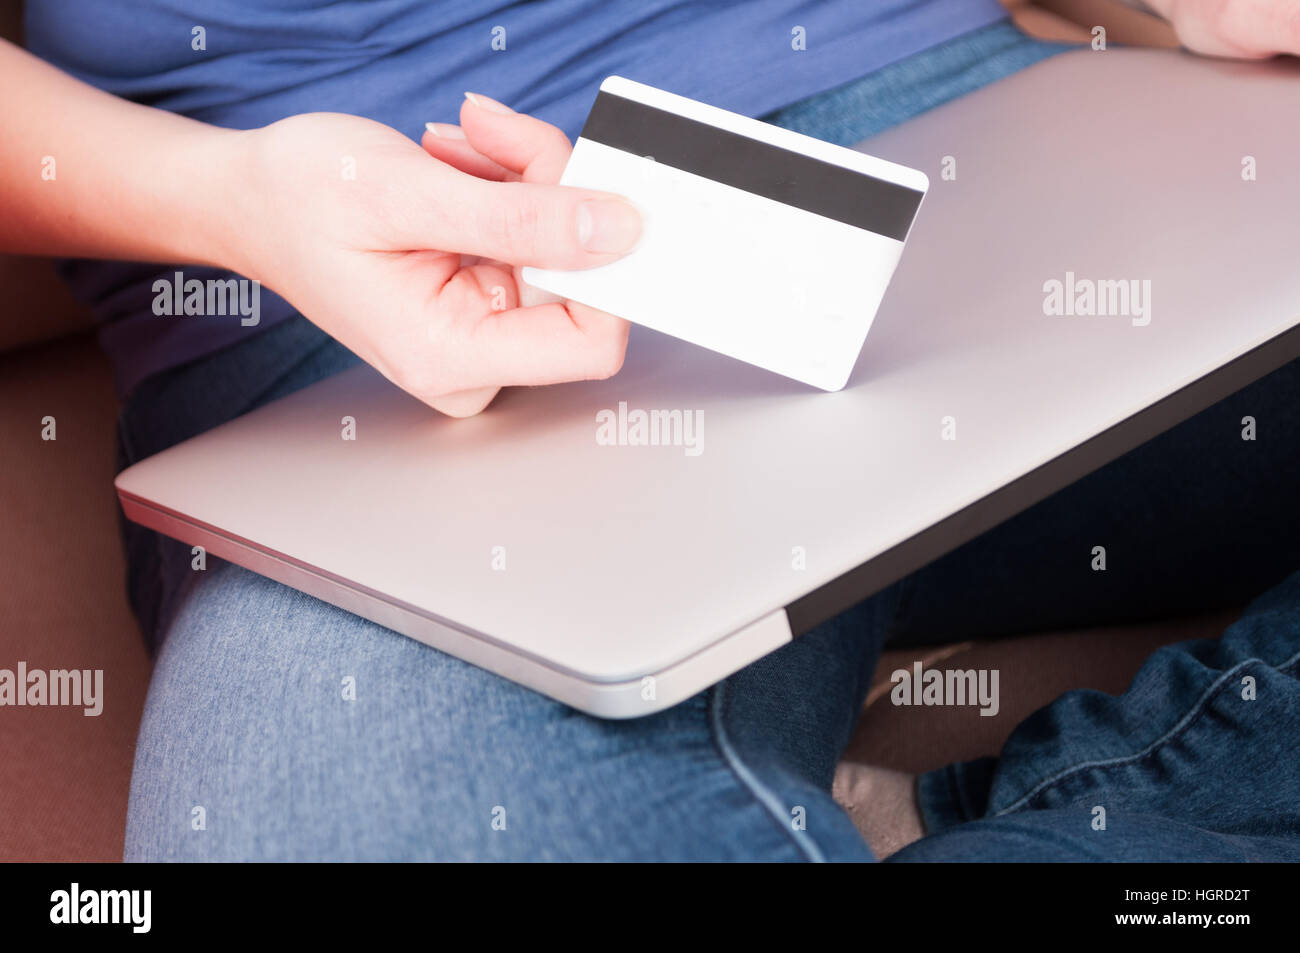 Close-up of credit card and laptop like online shopping retail concept Stock Photo